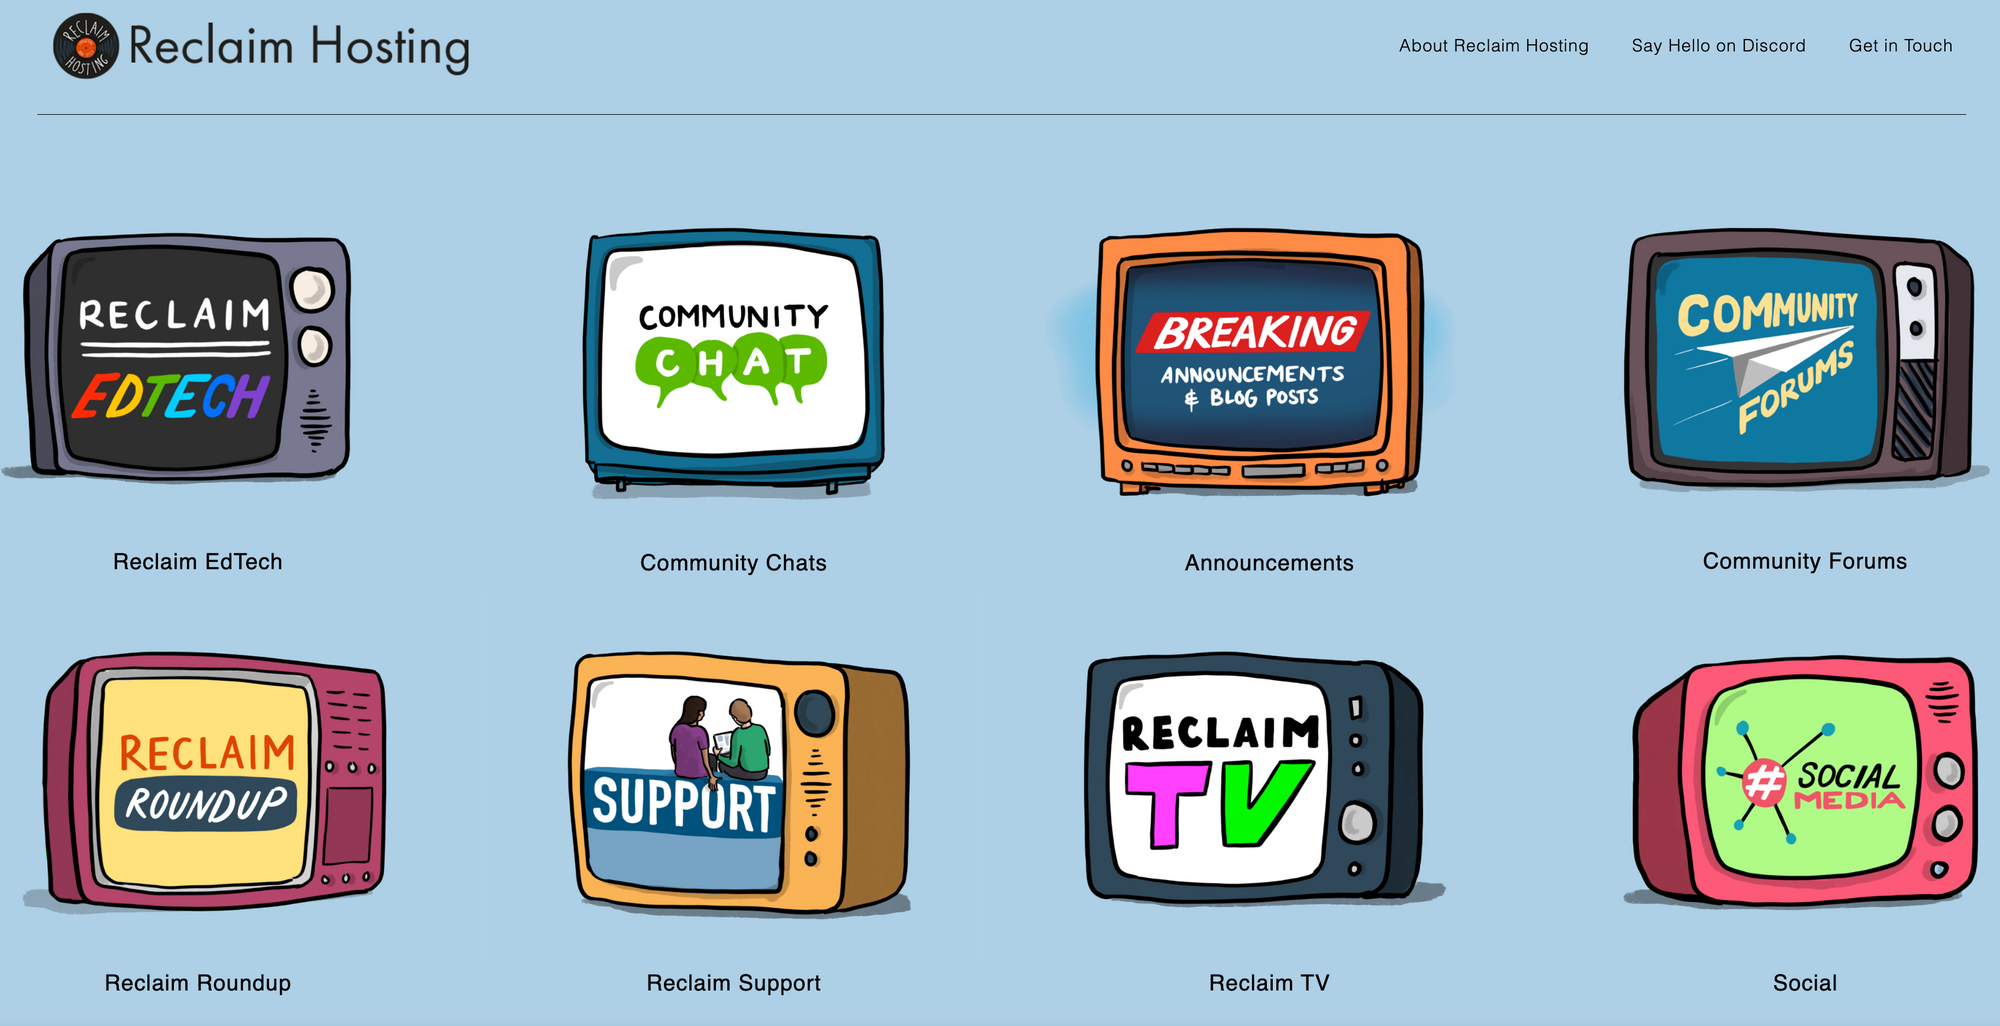 Image of TVs that symbolize different channels for connecting with Reclaim